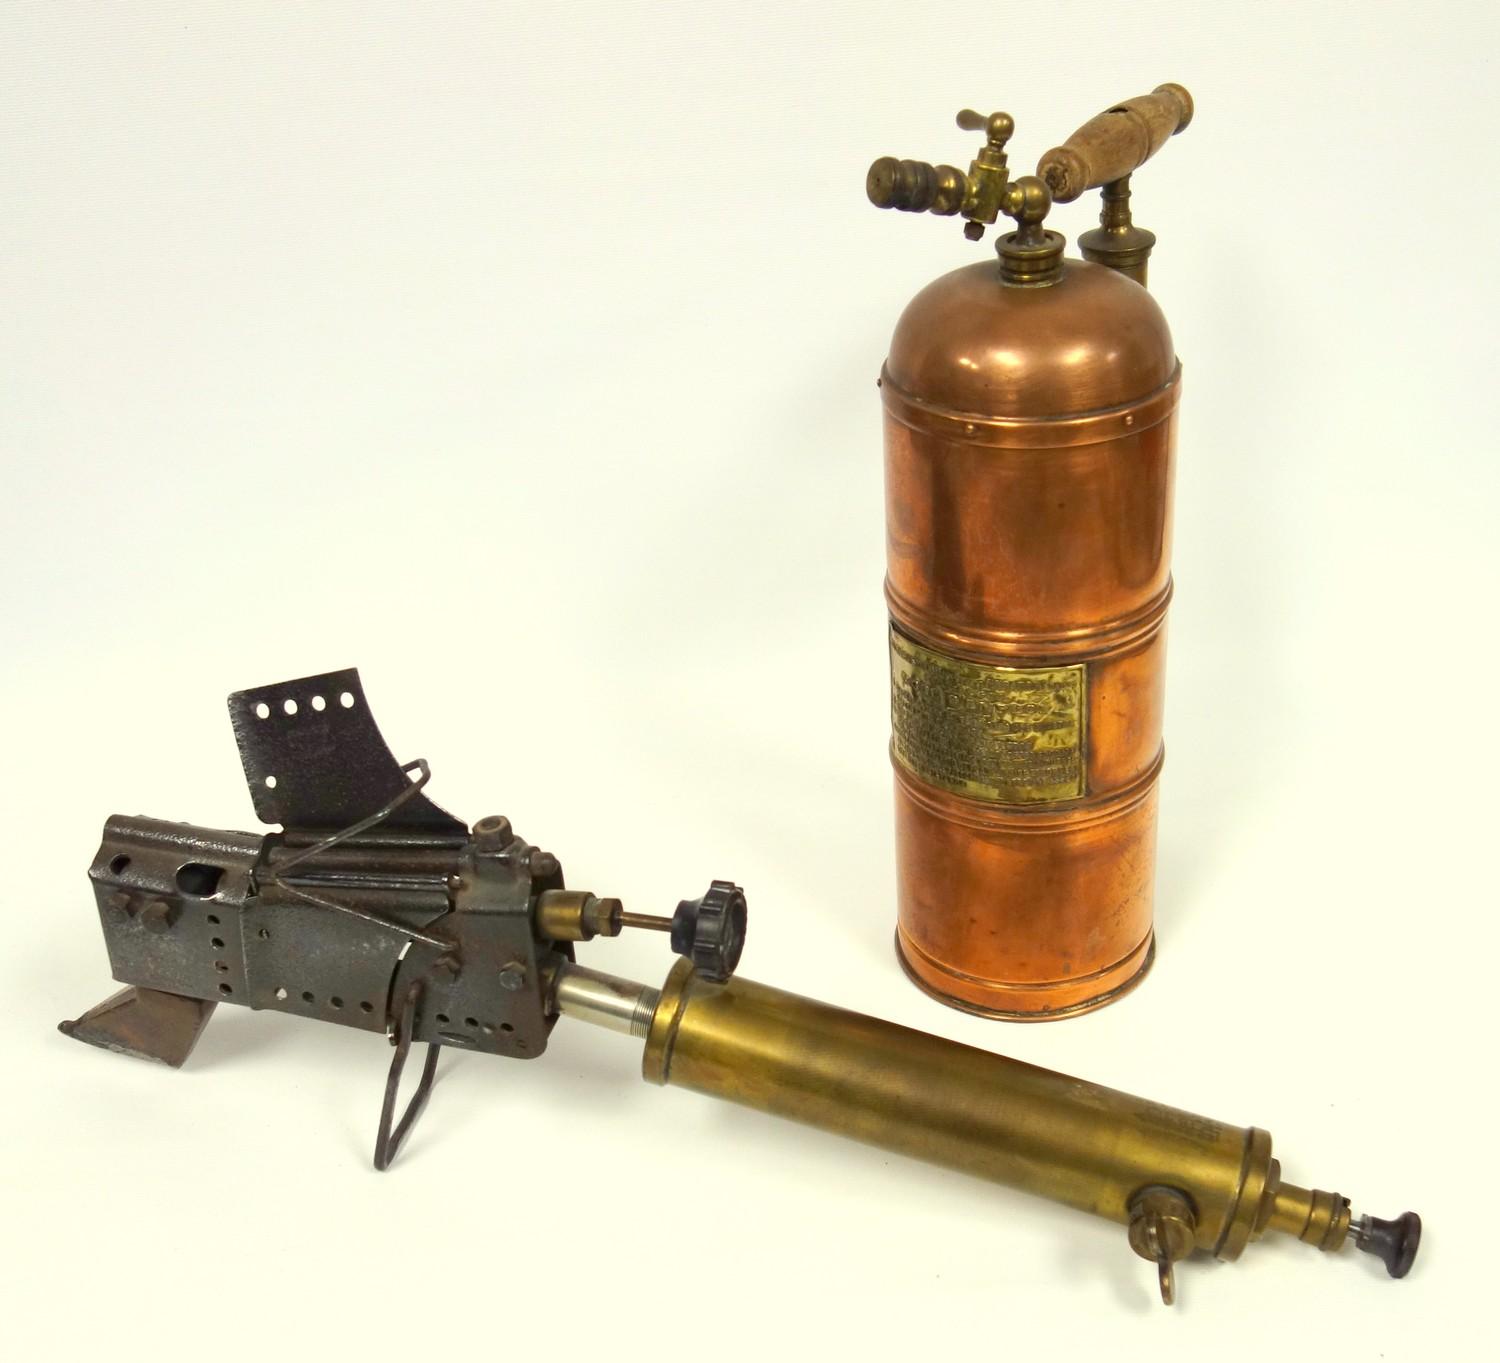 French brass and copper garden spray pump 'Pulverisateur Systeme Muratori', and an old 'Rapide'